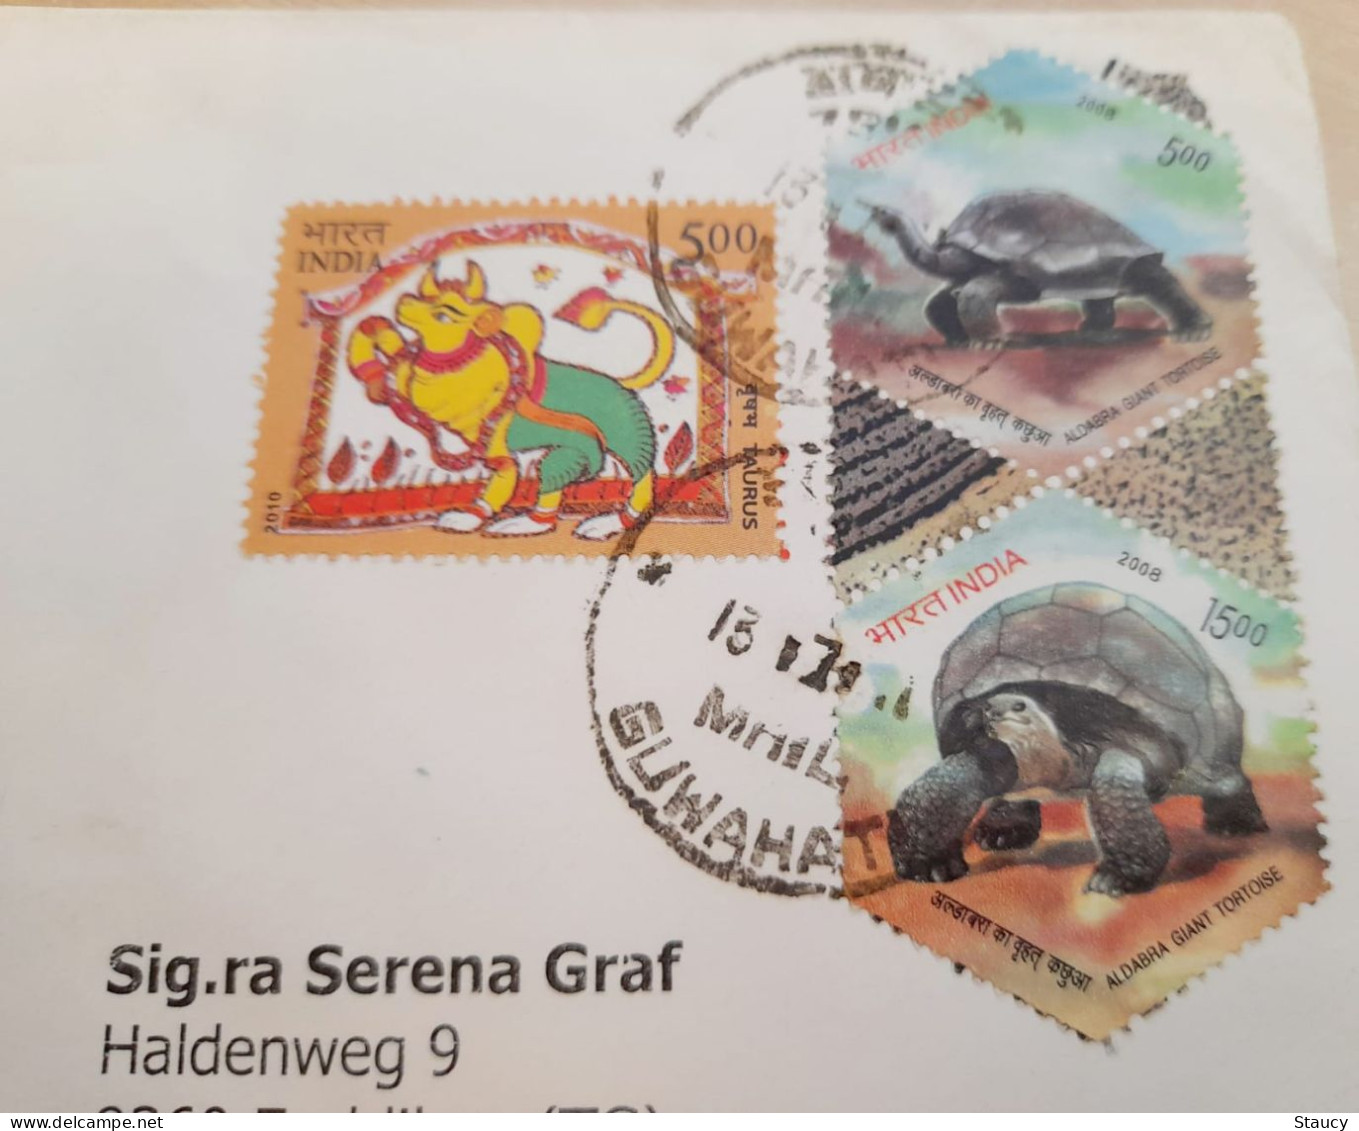 INDIA,2011,RETURN TO SENDER LABEL,AIR MAIL COVER TO SWITZERLAND,3 STAMPS,TORTOISE,ASTROLOGICAL SIGNS, GUWAHATI - Corréo Aéreo